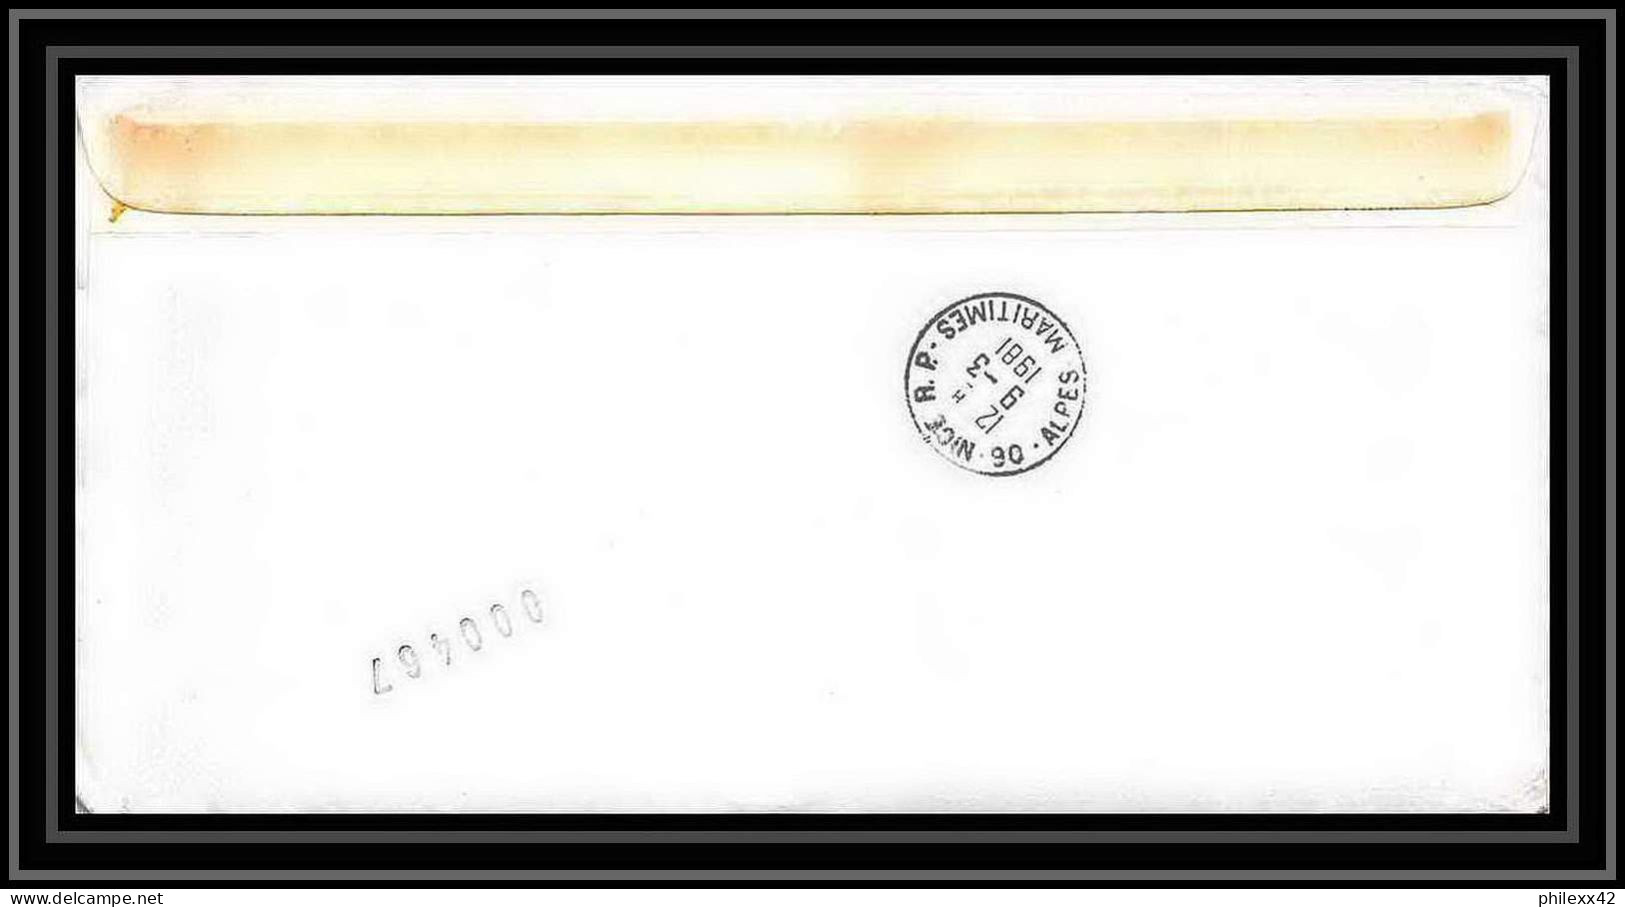 1210 Paquebot Marion Dufresne Md25 Fibex 6/3/1981 TAAF Antarctic Terres Australes Lettre (cover) Signé Signed - Lettres & Documents